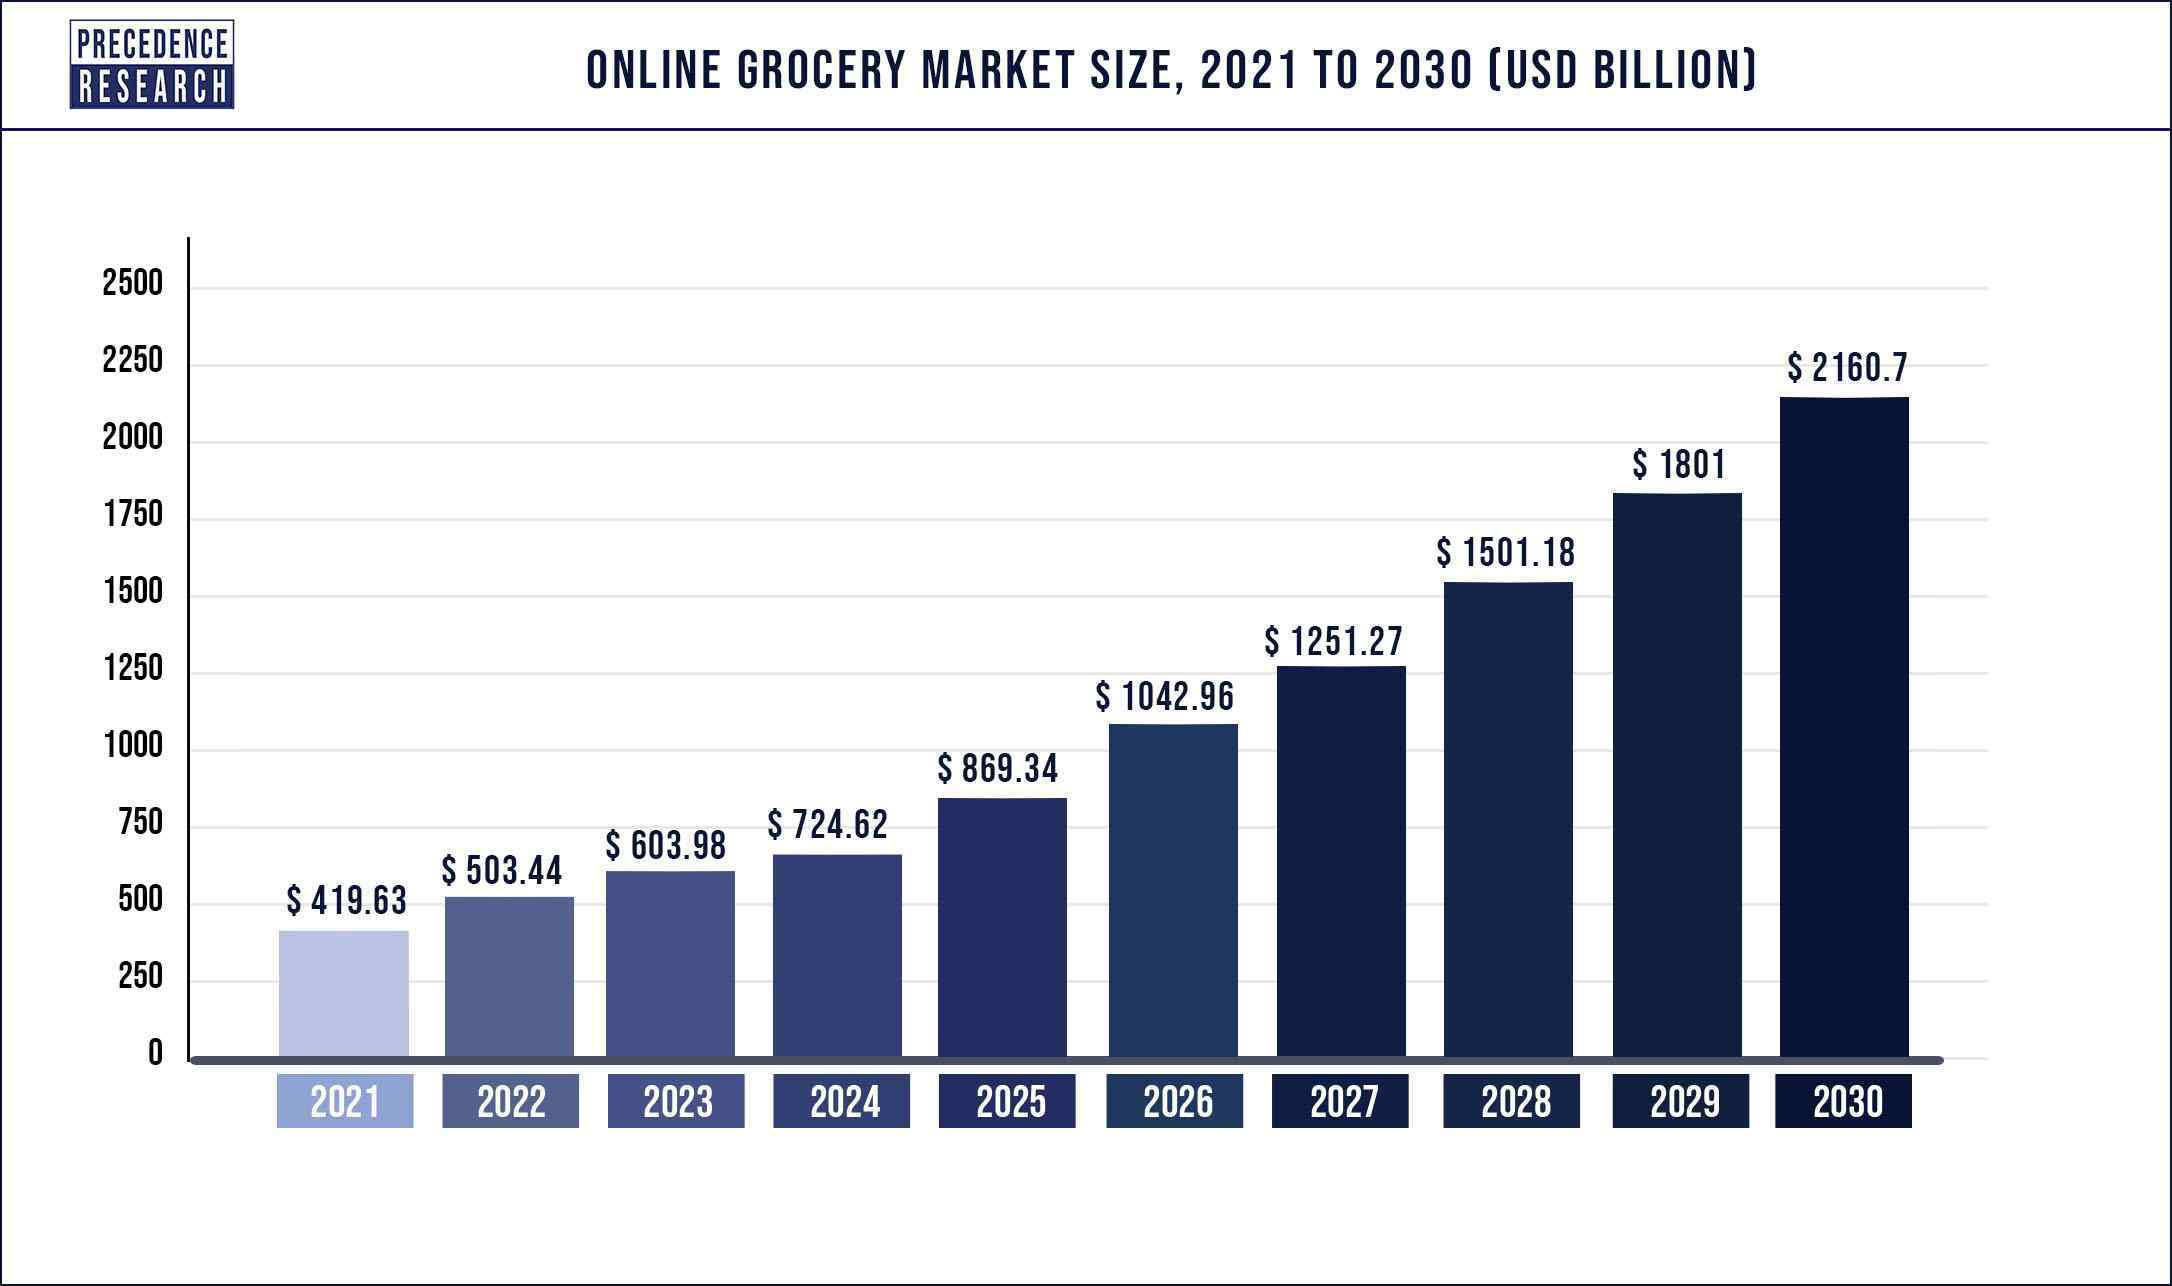 Online Grocery Market Size 2021 to 2030